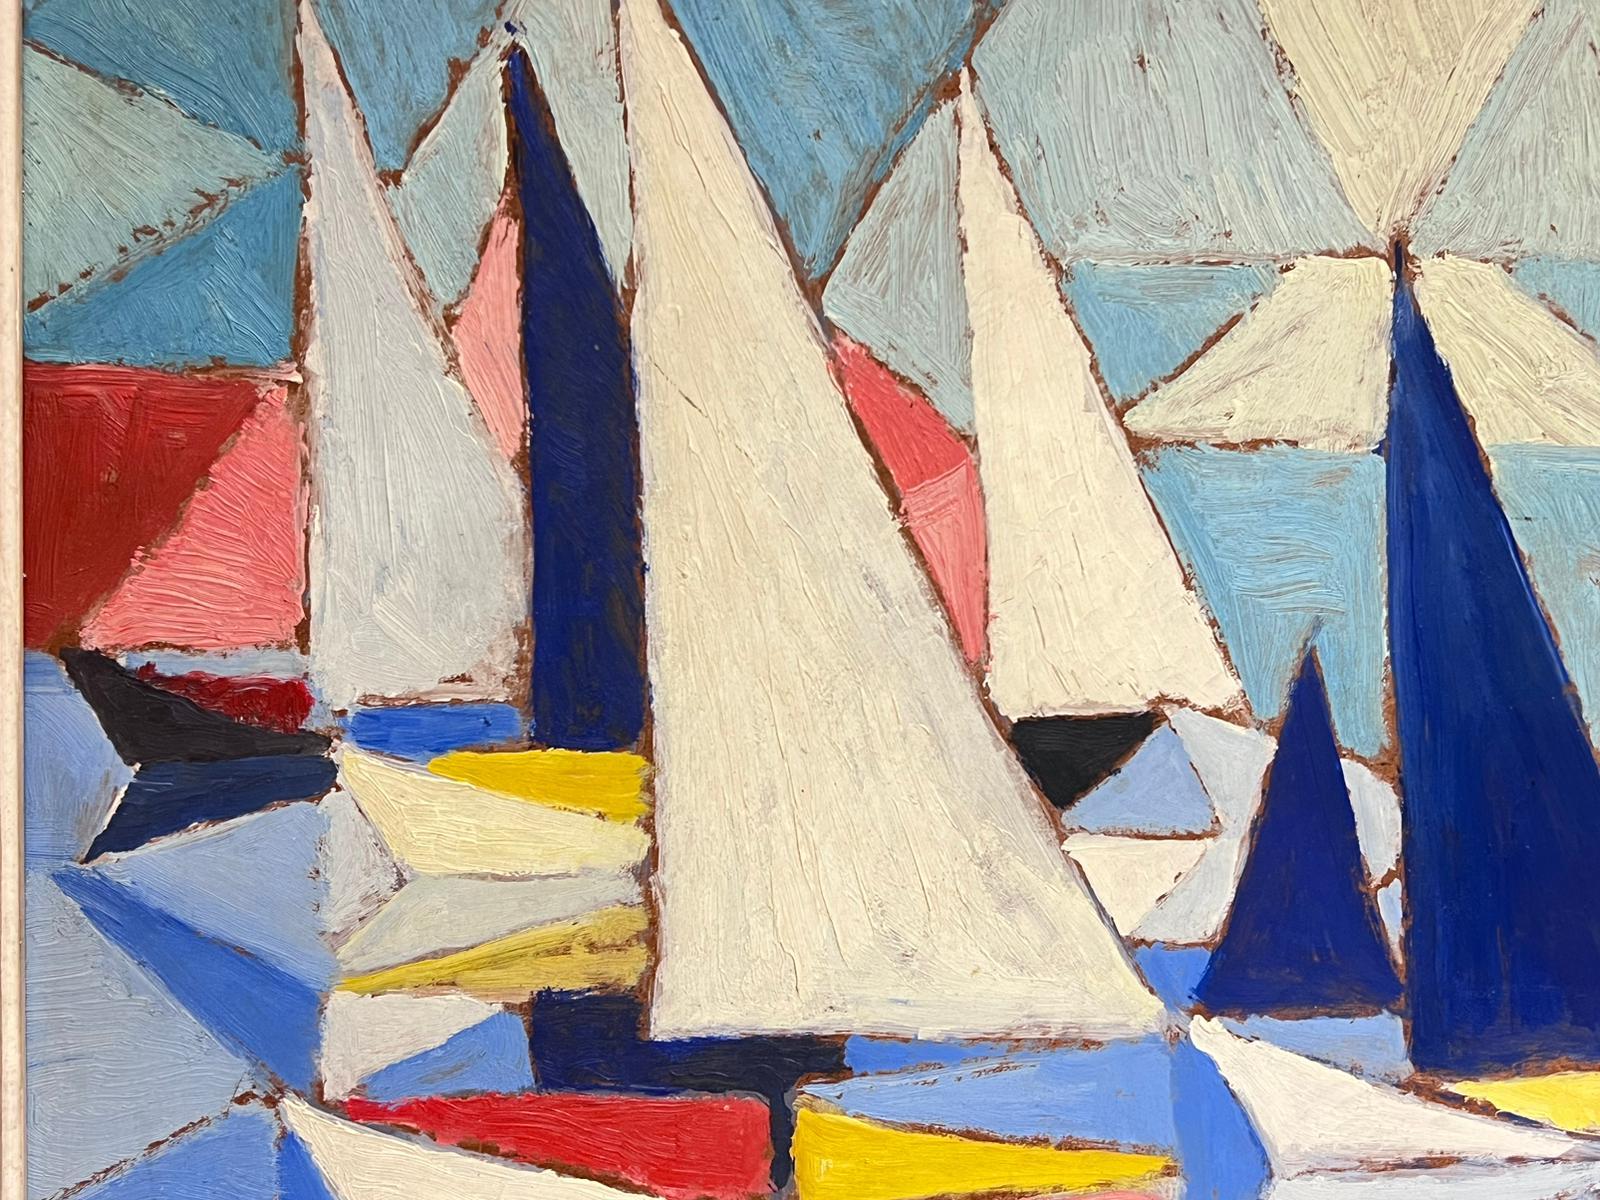 Sailing Boats at Sea - the Regatta
French School, cubist artist circa 1970's
oil on board, framed
framed: 27.5 x 35 inches
board: 21 x 29.5 inches
provenance: private collection
condition: very good and sound condition